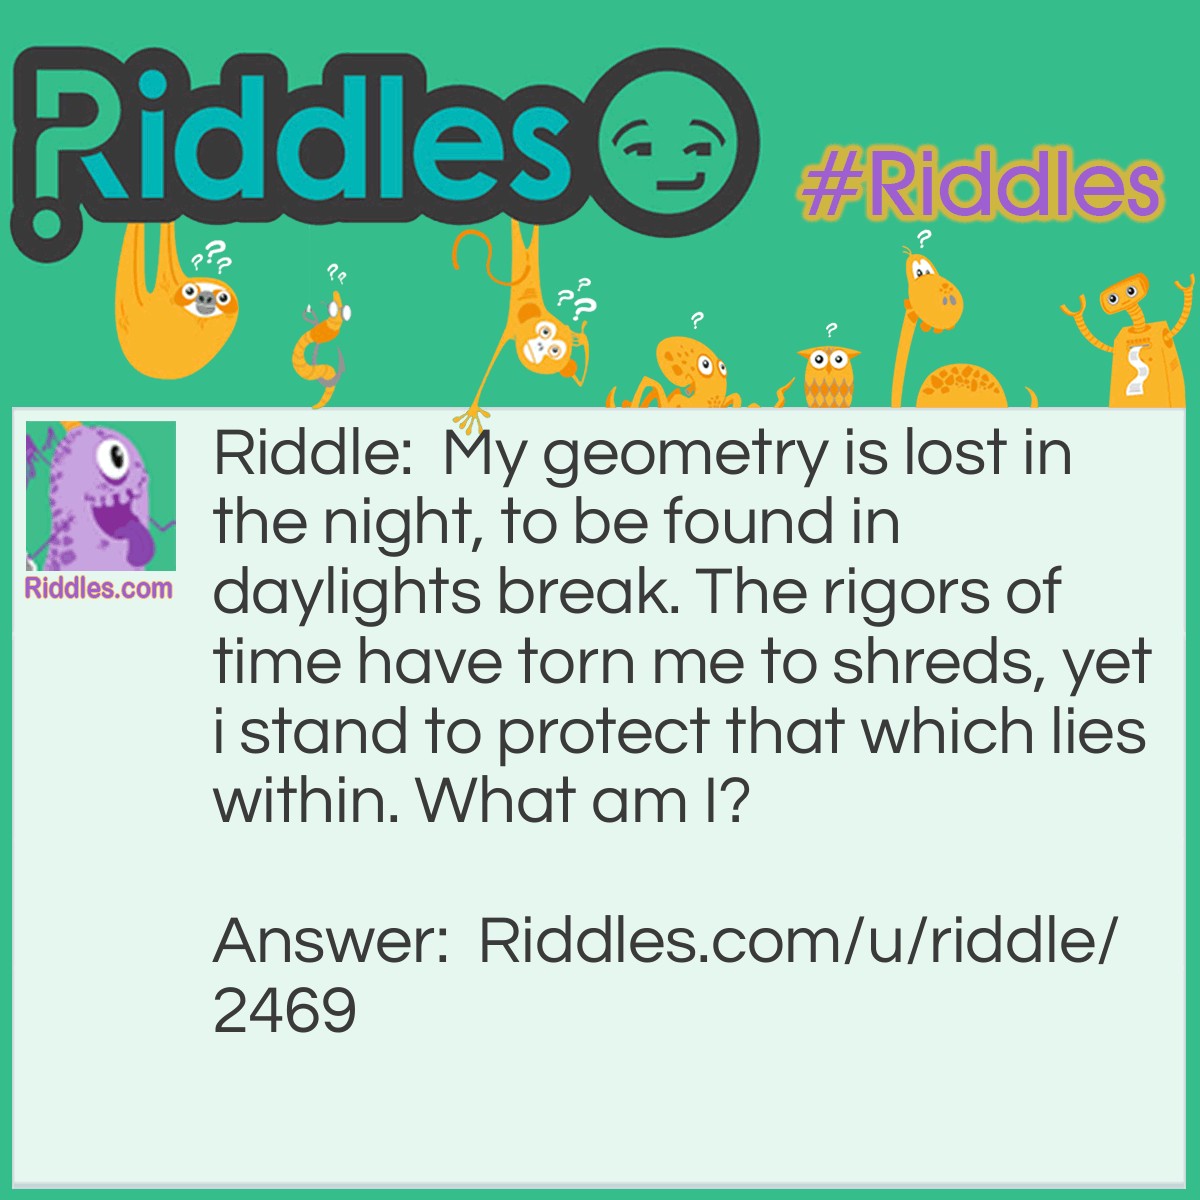 Riddle: My geometry is lost in the night, to be found in daylights break. The rigors of time have torn me to shreds, yet i stand to protect that which lies within. What am I? Answer: A pyramid.